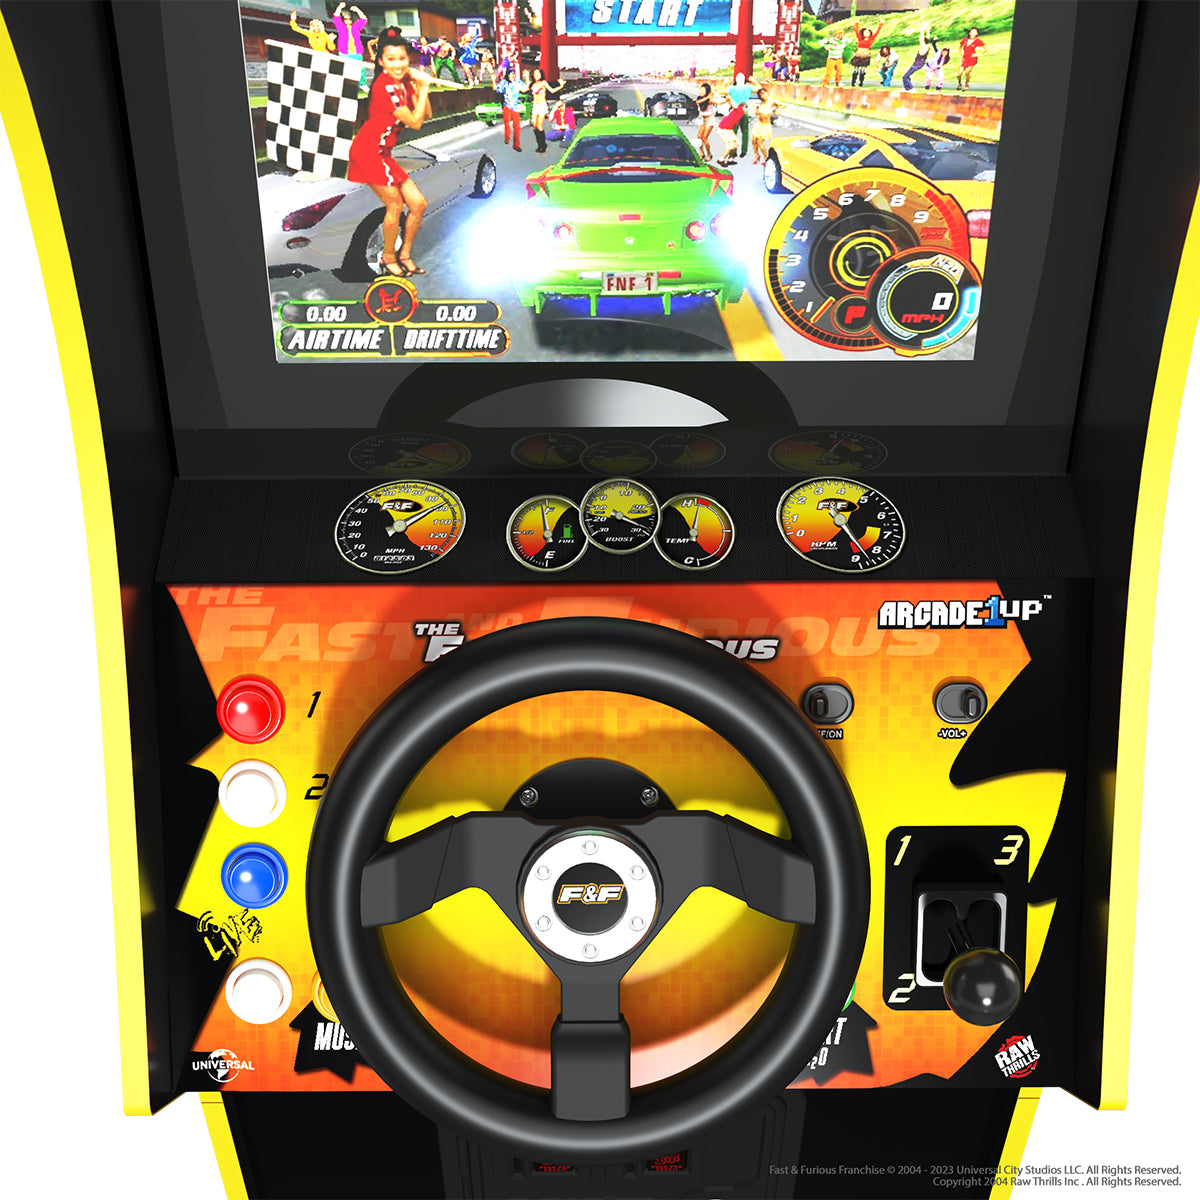 Arcade1Up The Fast & The Furious Deluxe Arcade Game